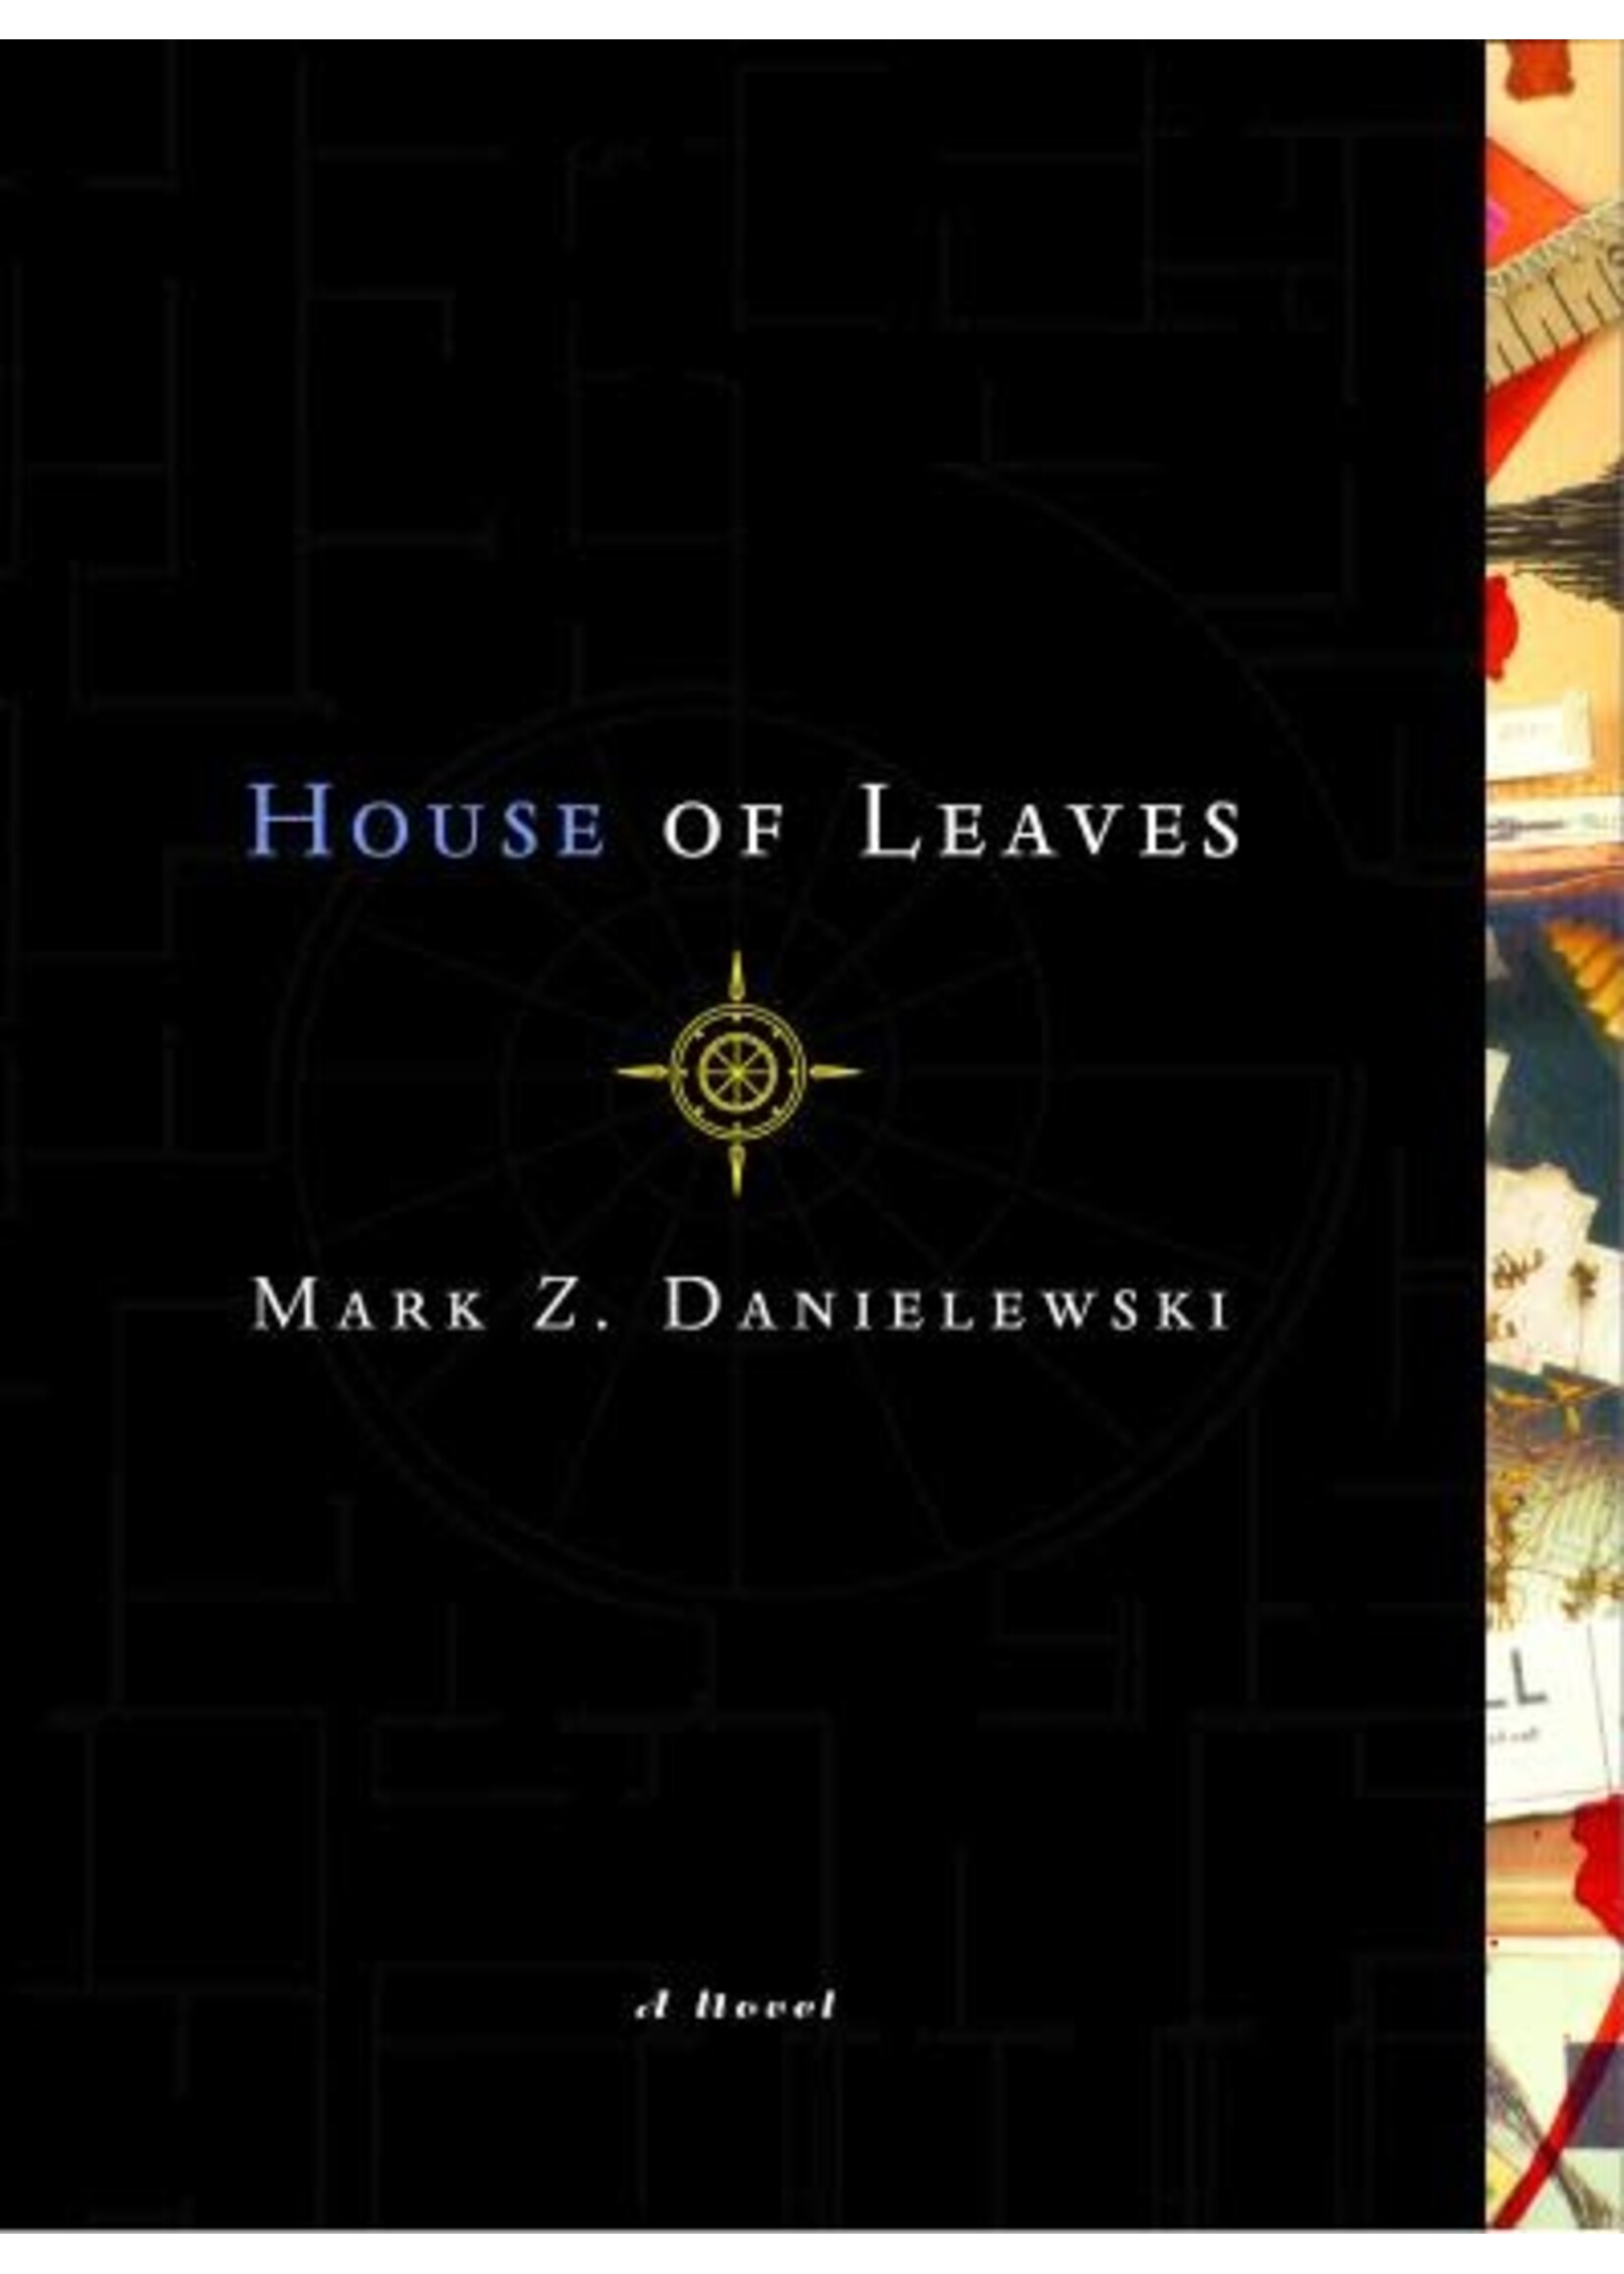 House of Leaves: The Remastered Full-Color Edition by Mark Z. Danielewski